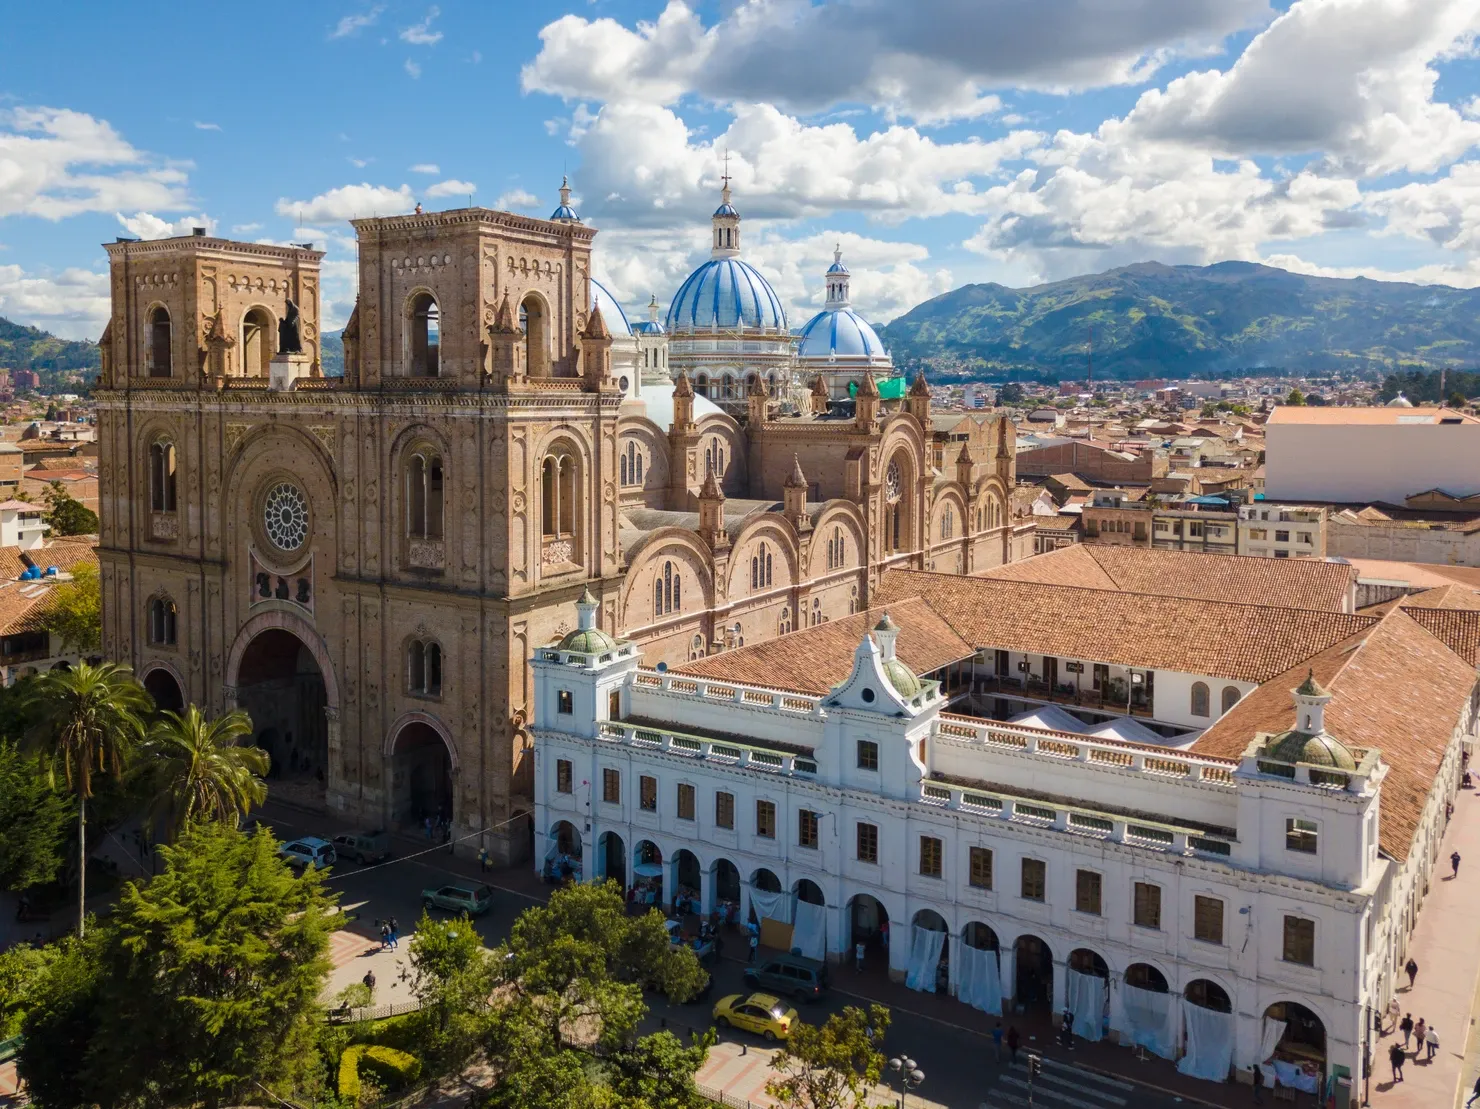 Cathedral of the Immaculate Conception, Cuenca Ecuador